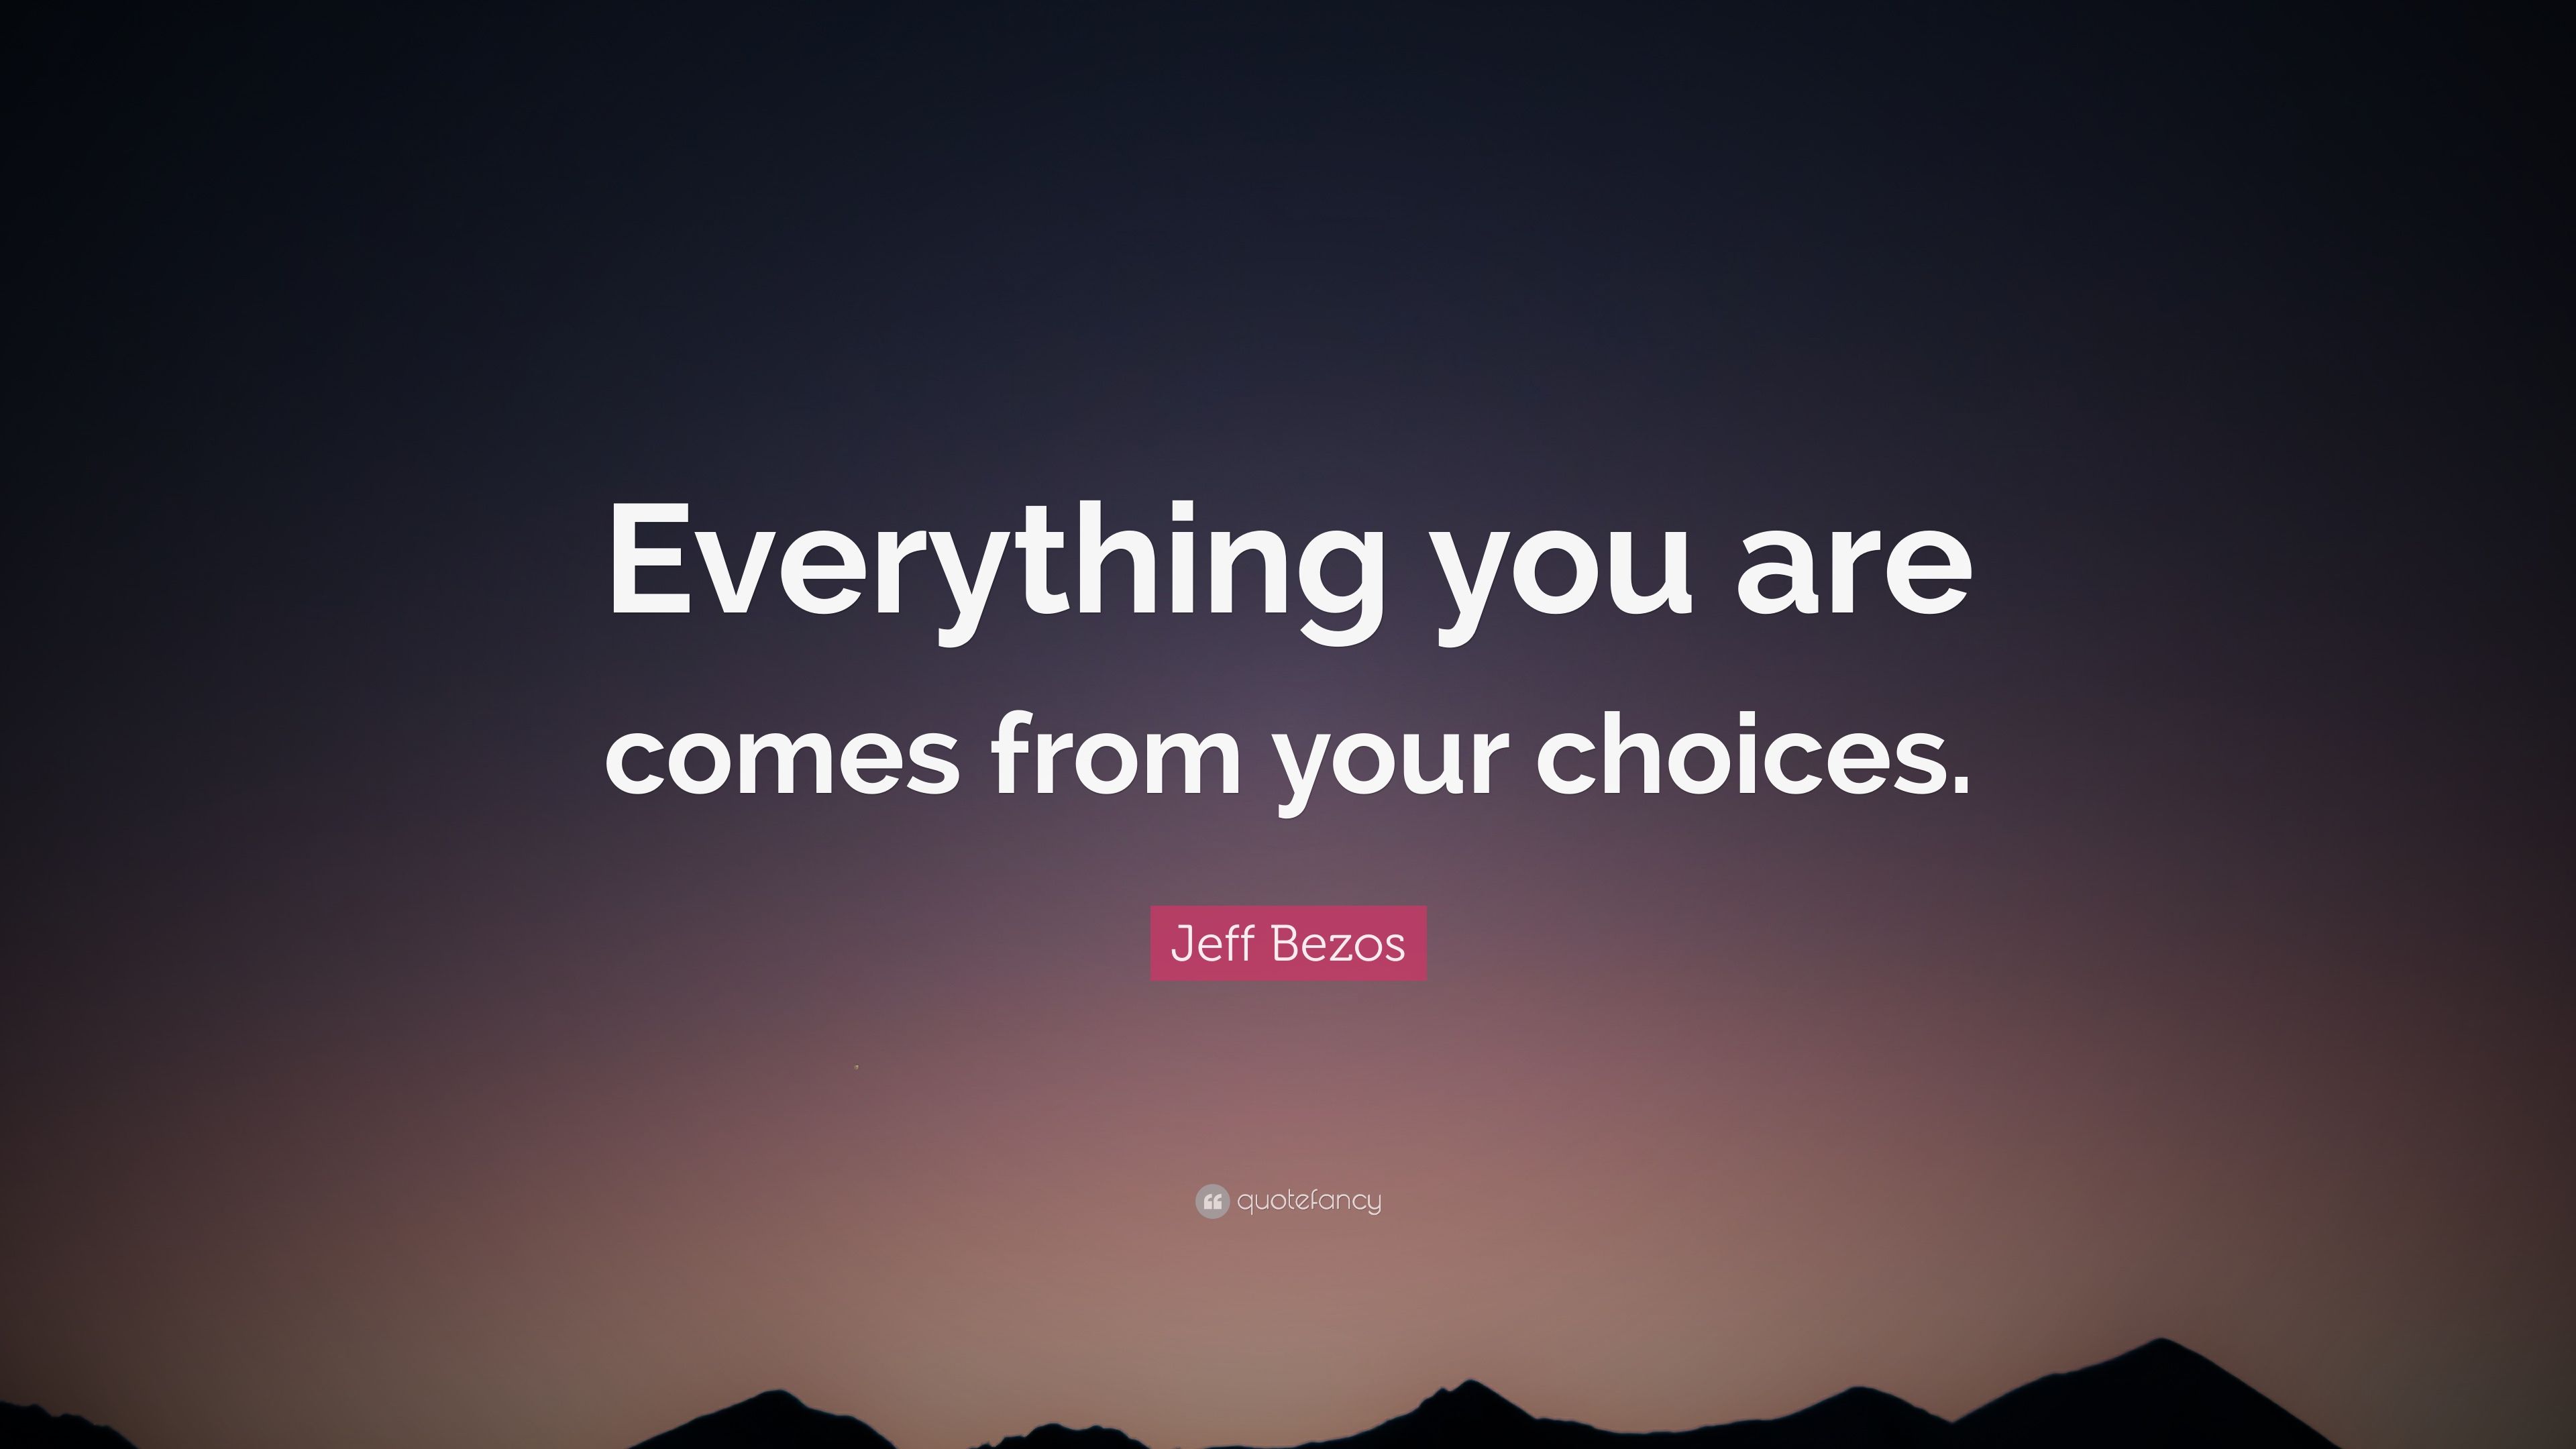 Jeff Bezos Quote: “Everything you are comes from your choices.” (12 wallpaper)